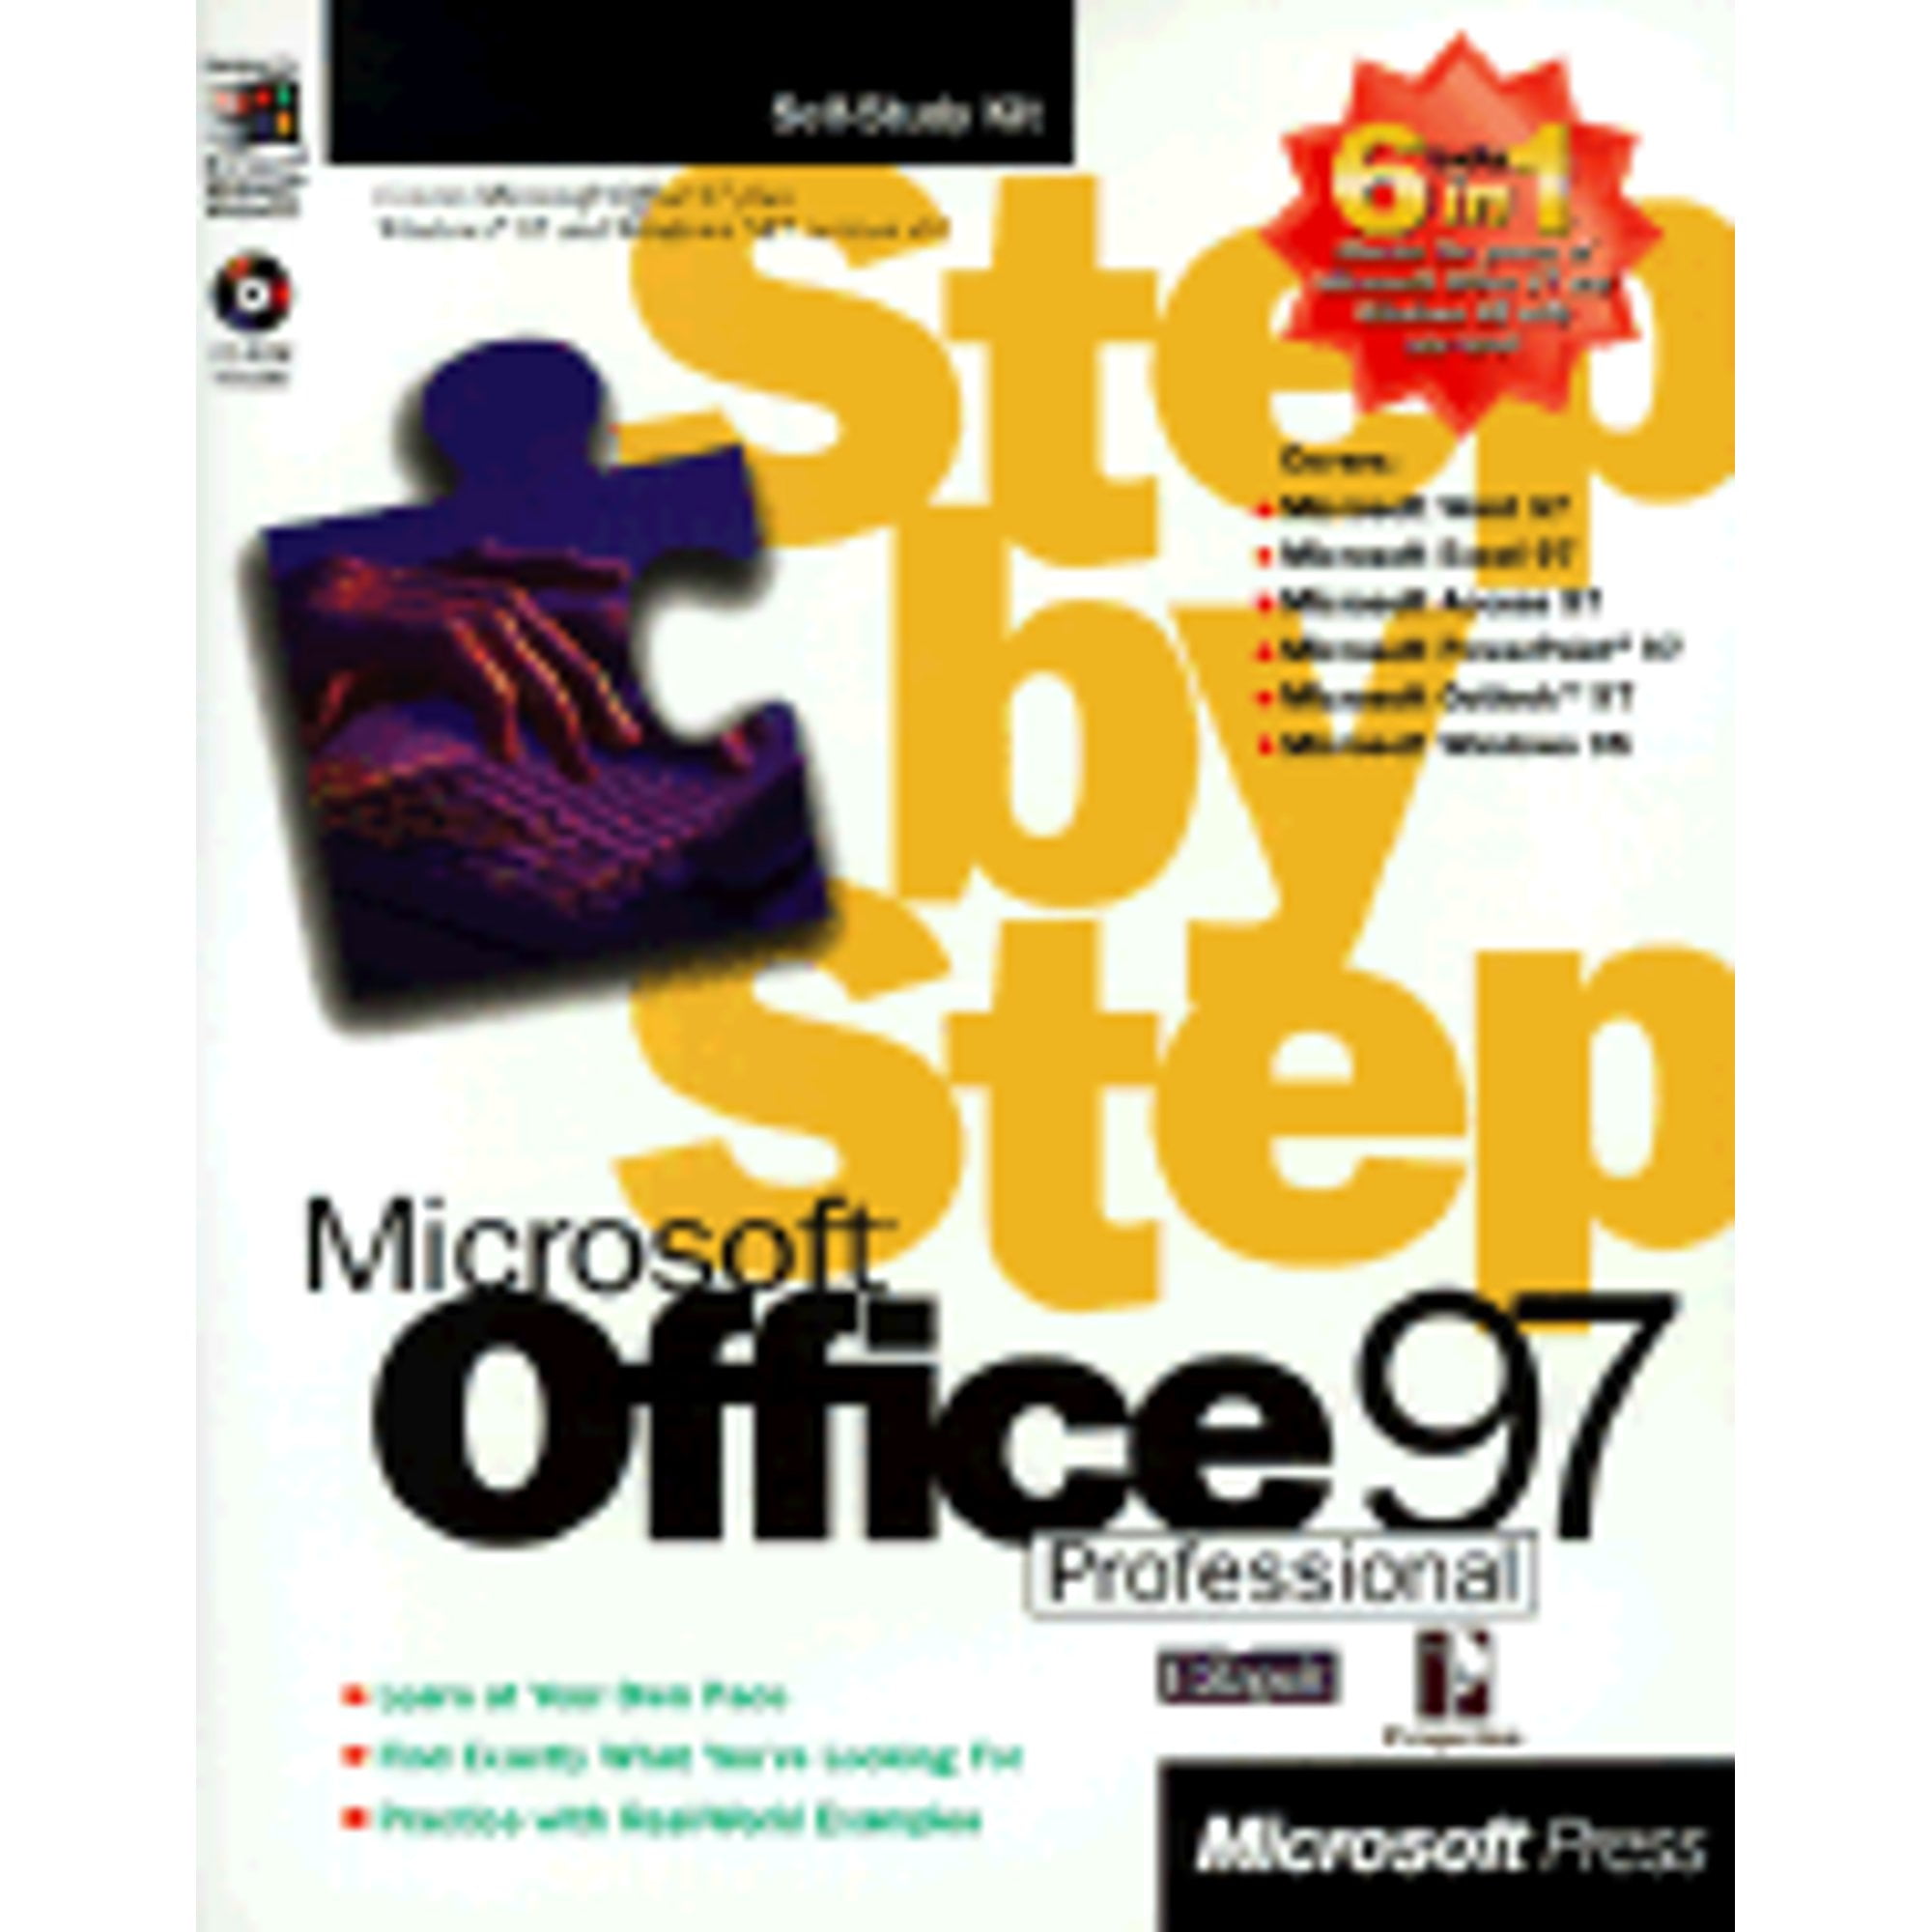 Microsoft Office 97 Professional 6-In-1 Step by Step (Pre-Owned Paperback  9781572317031) by Catapult Inc, Perspection Inc 